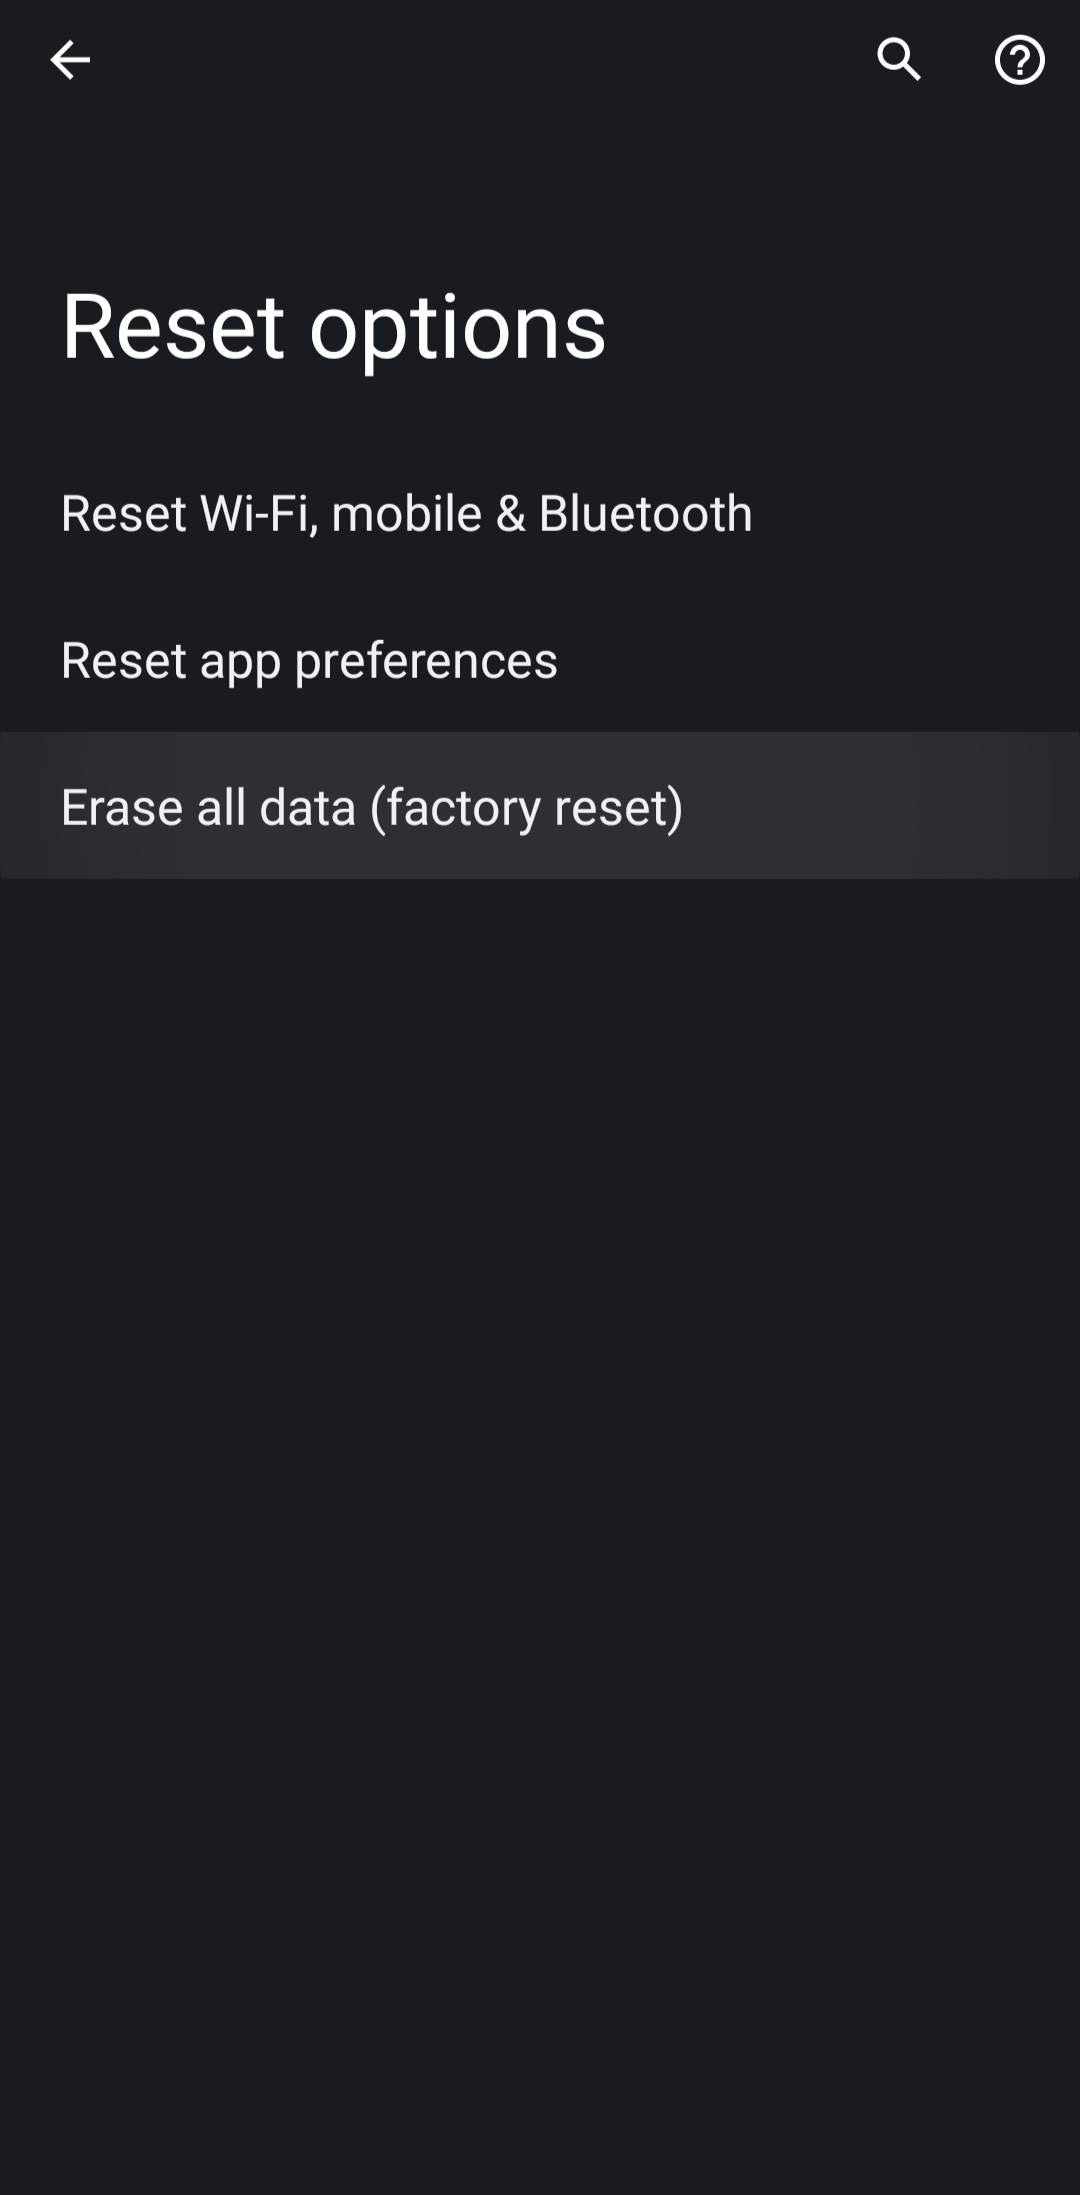 The Reset Options menu on an Android device.